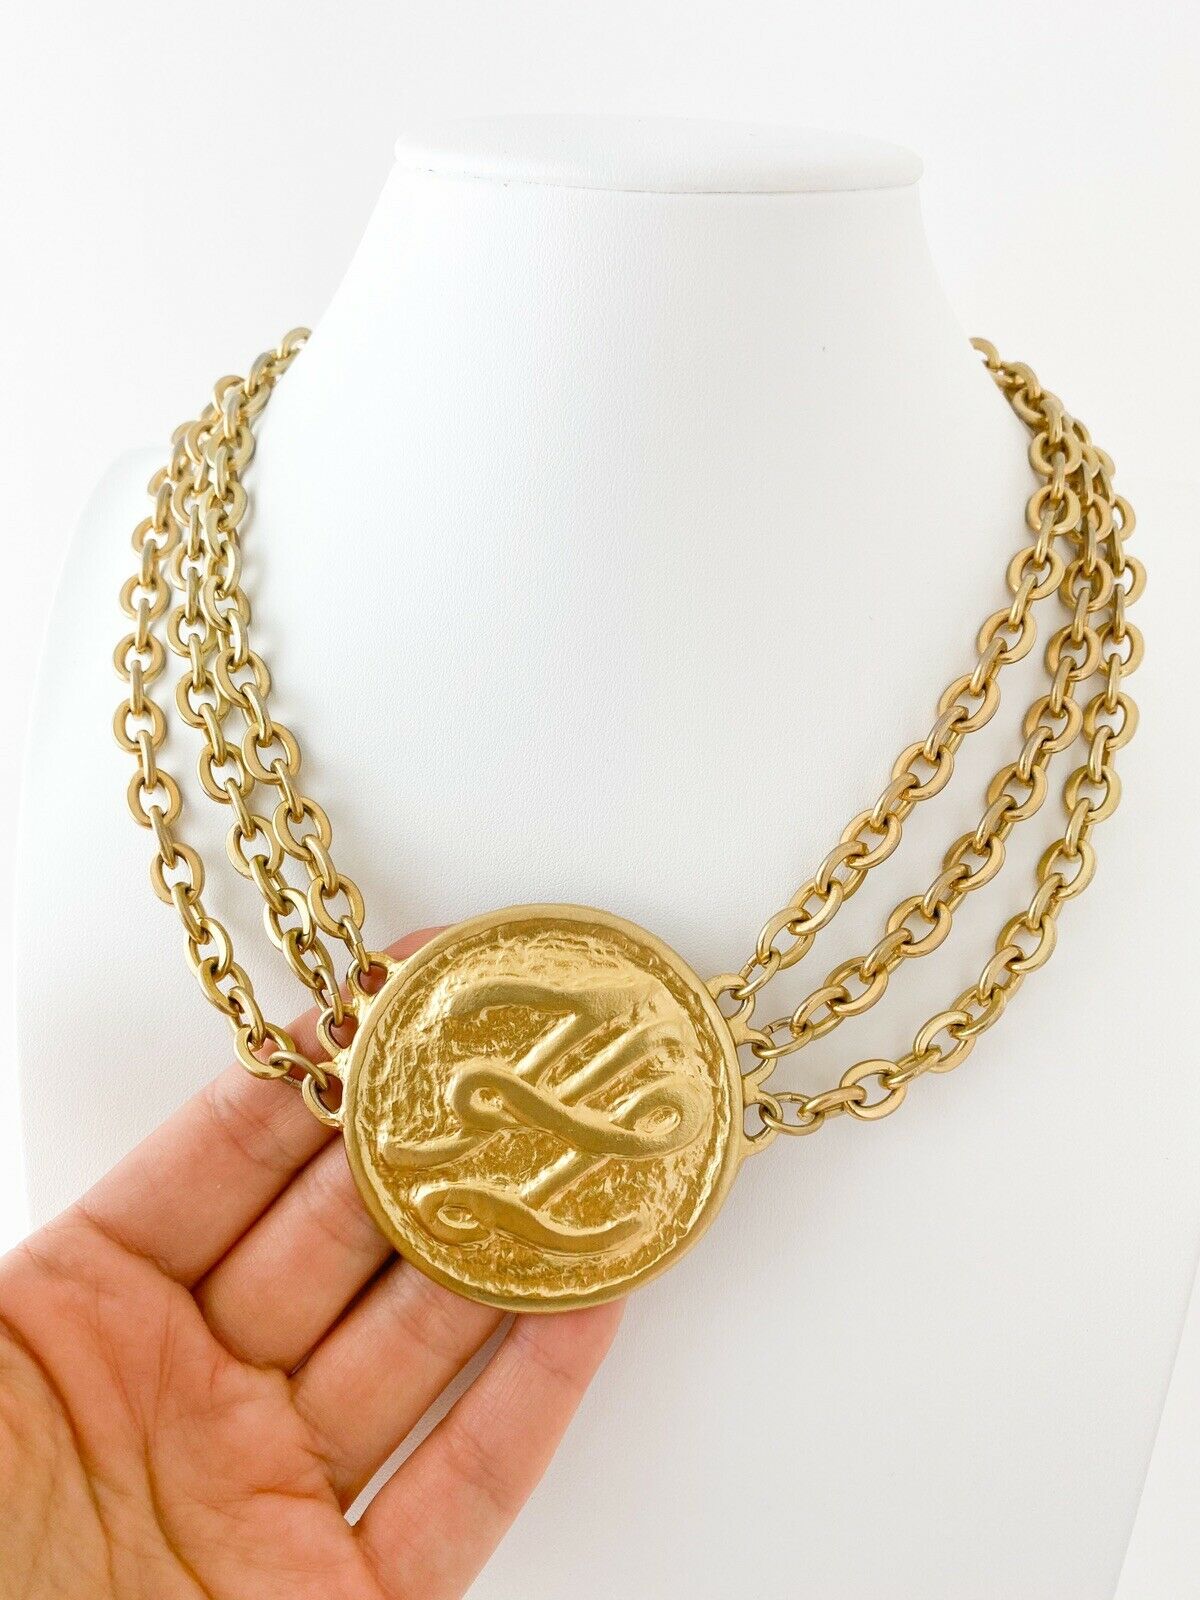 【SOLD OUT】Karl Lagerfeld Vintage Gold Tone 3 Row Chain Necklace Extra Large